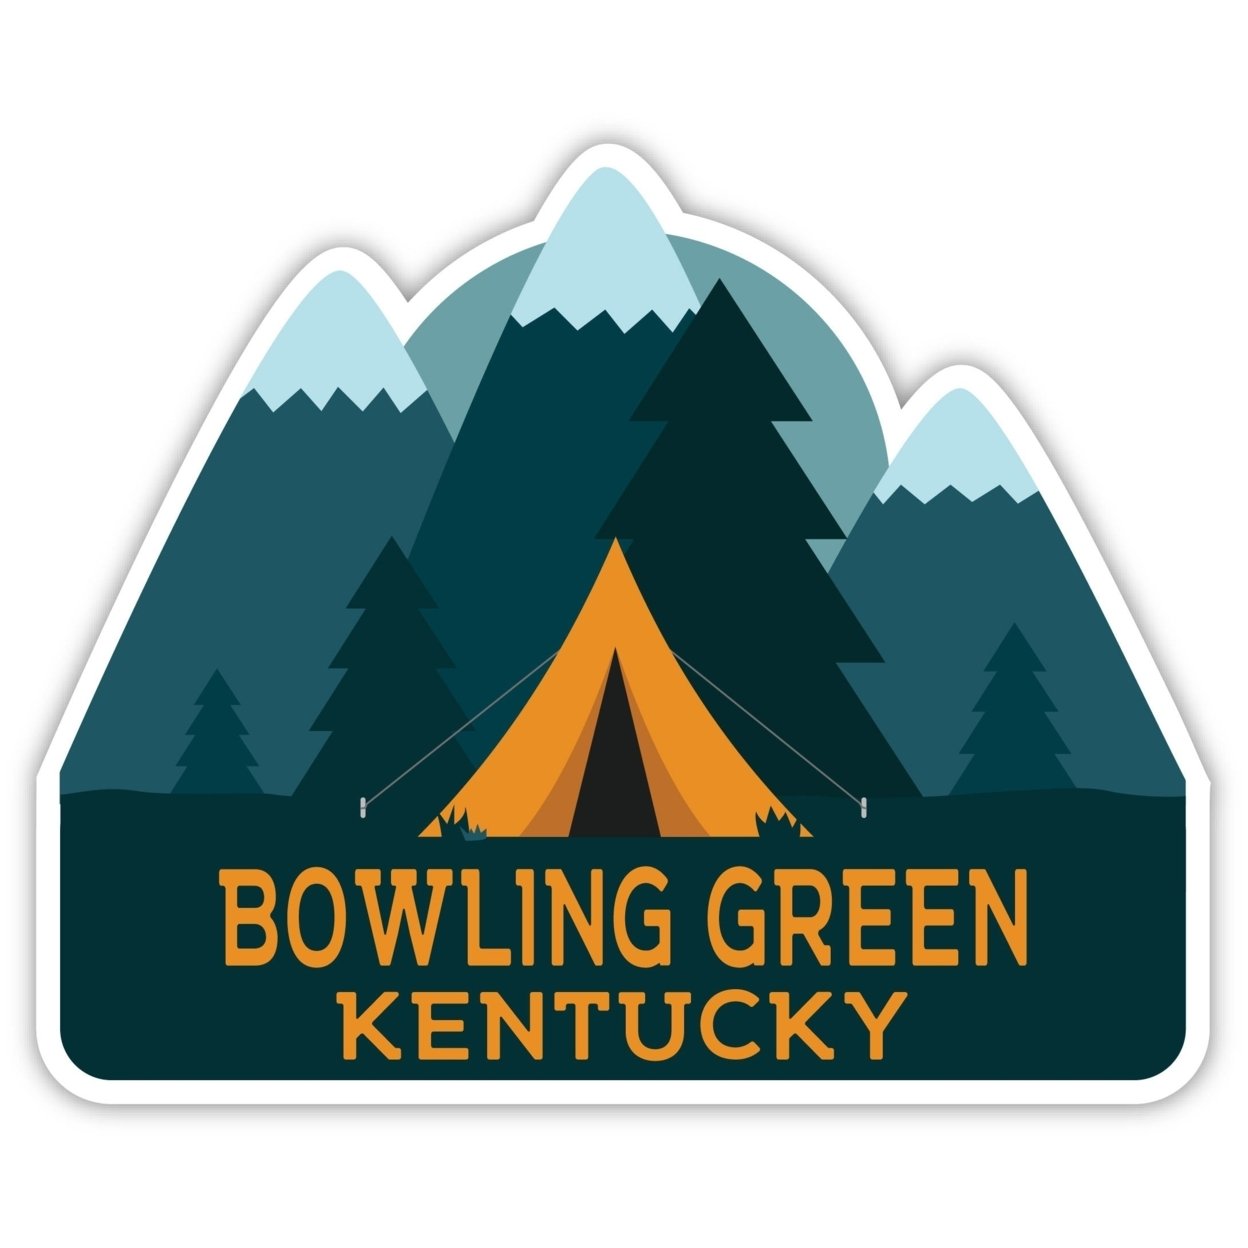 Bowling Green Kentucky Souvenir Decorative Stickers (Choose Theme And Size) - Single Unit, 2-Inch, Tent